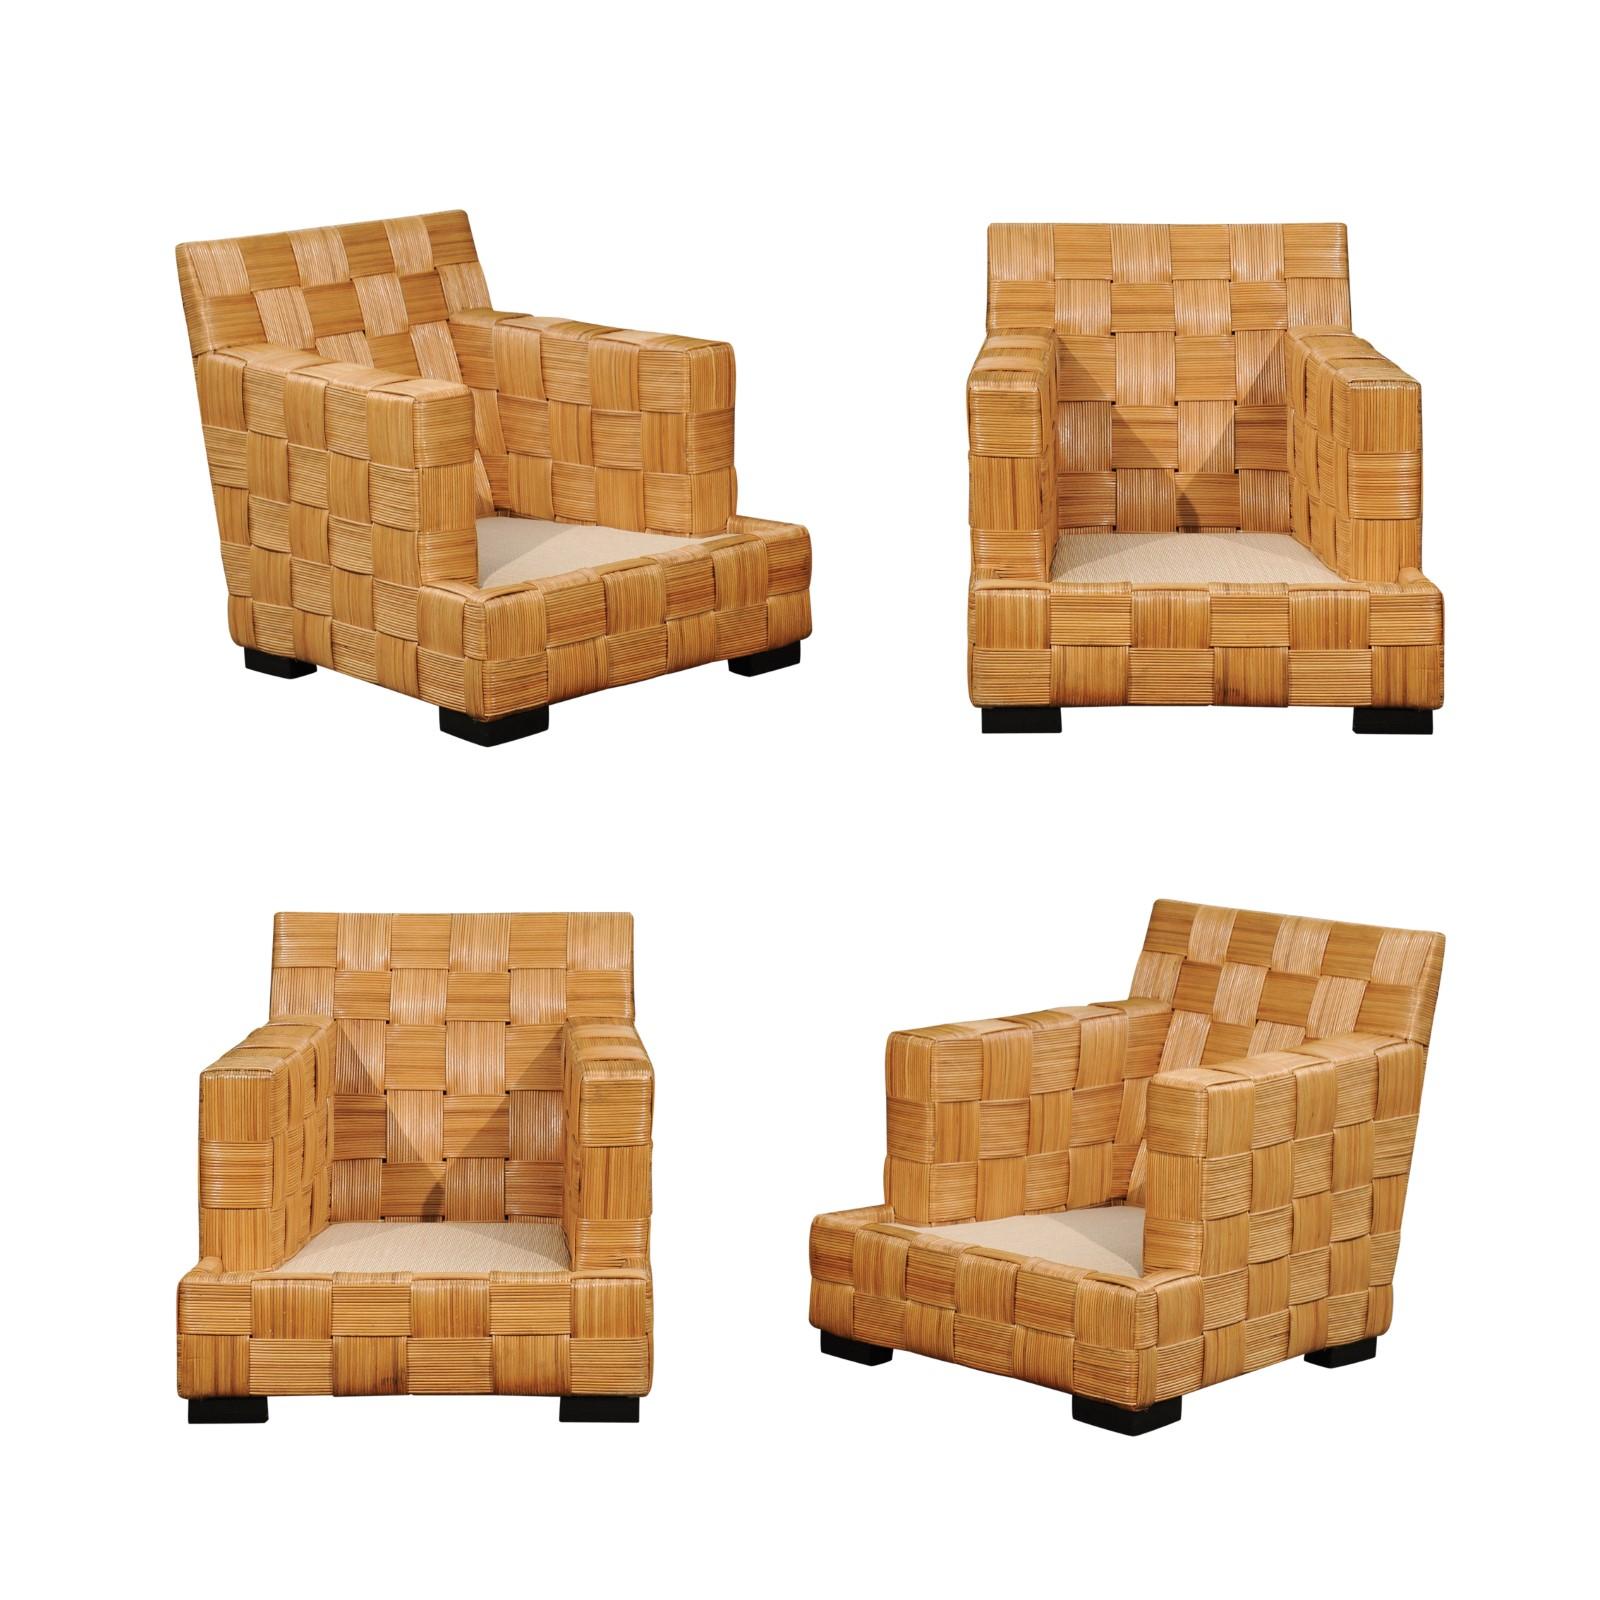 Unforgettable Set of of 4 Block Island Cane Chairs by John Hutton for Donghia For Sale 14